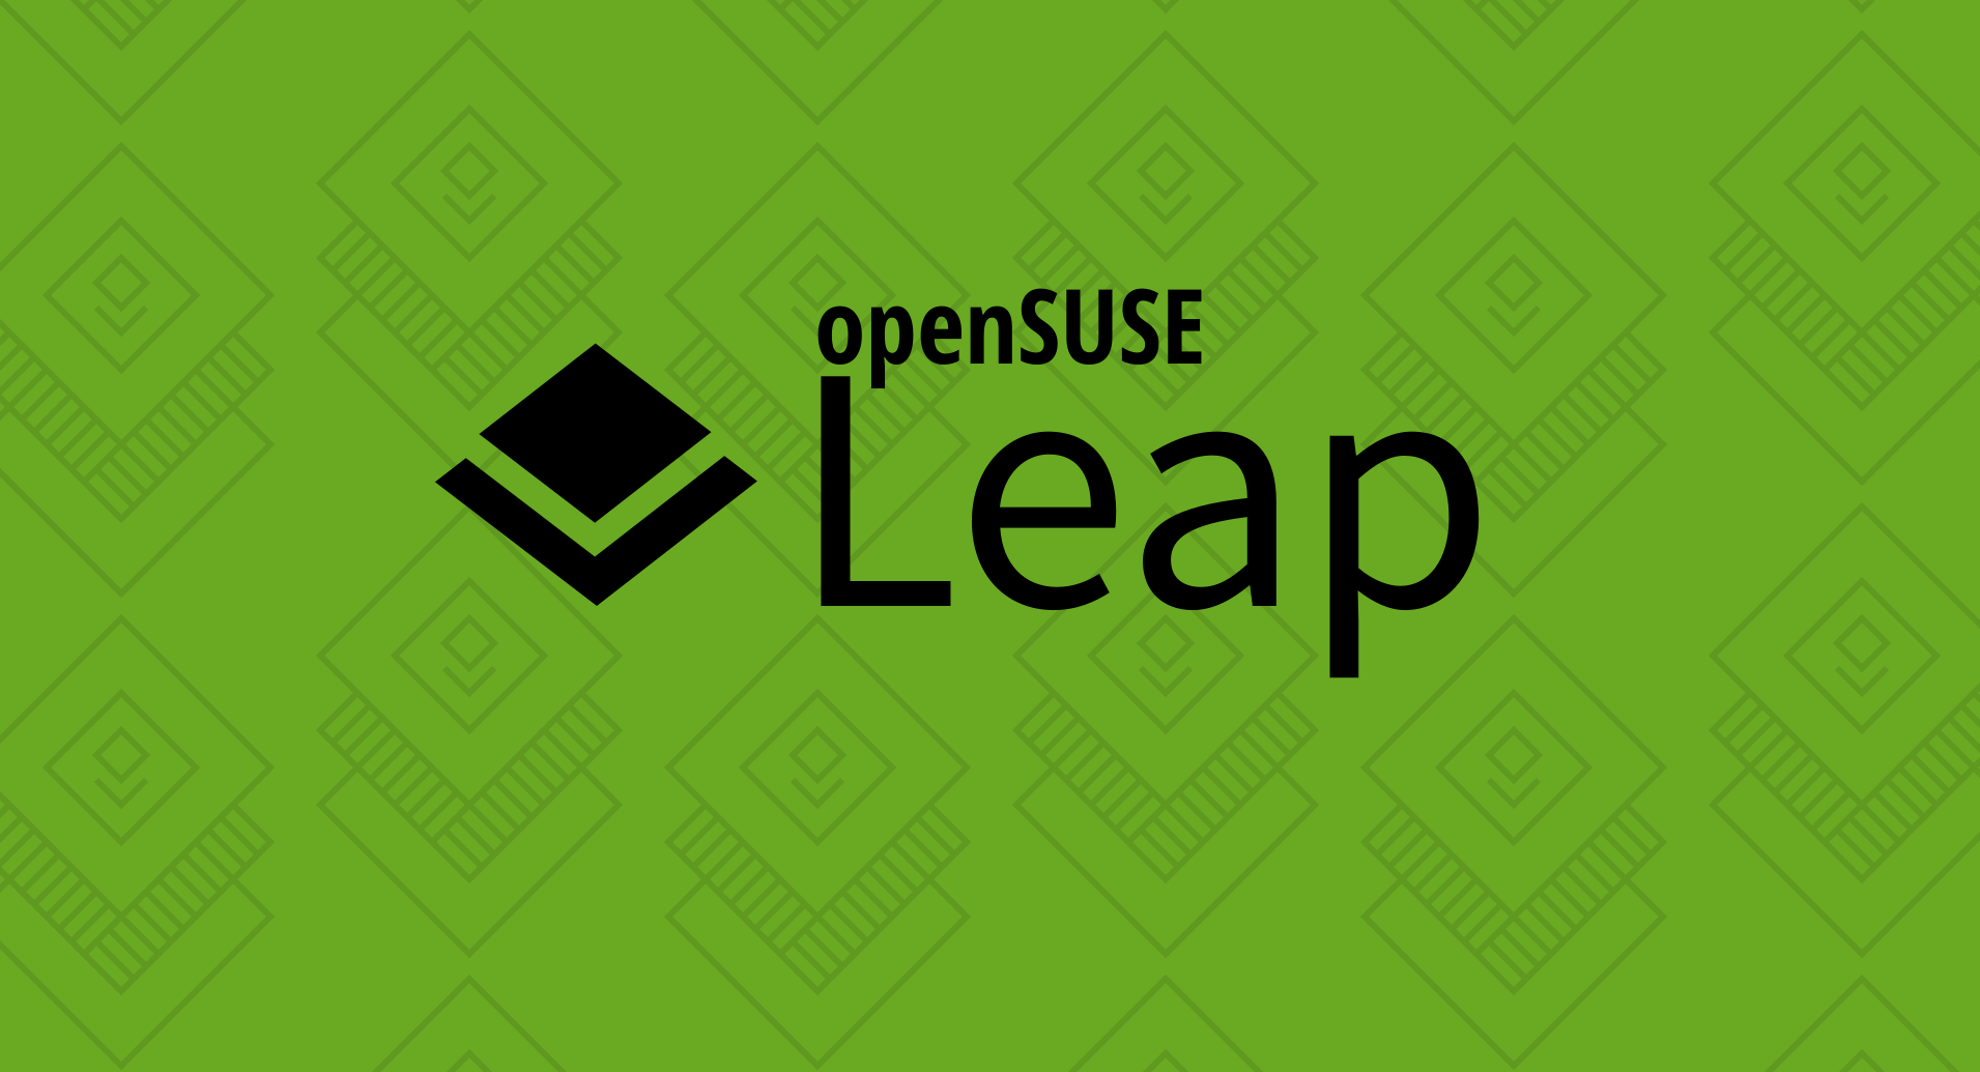 openSUSE Leap logo